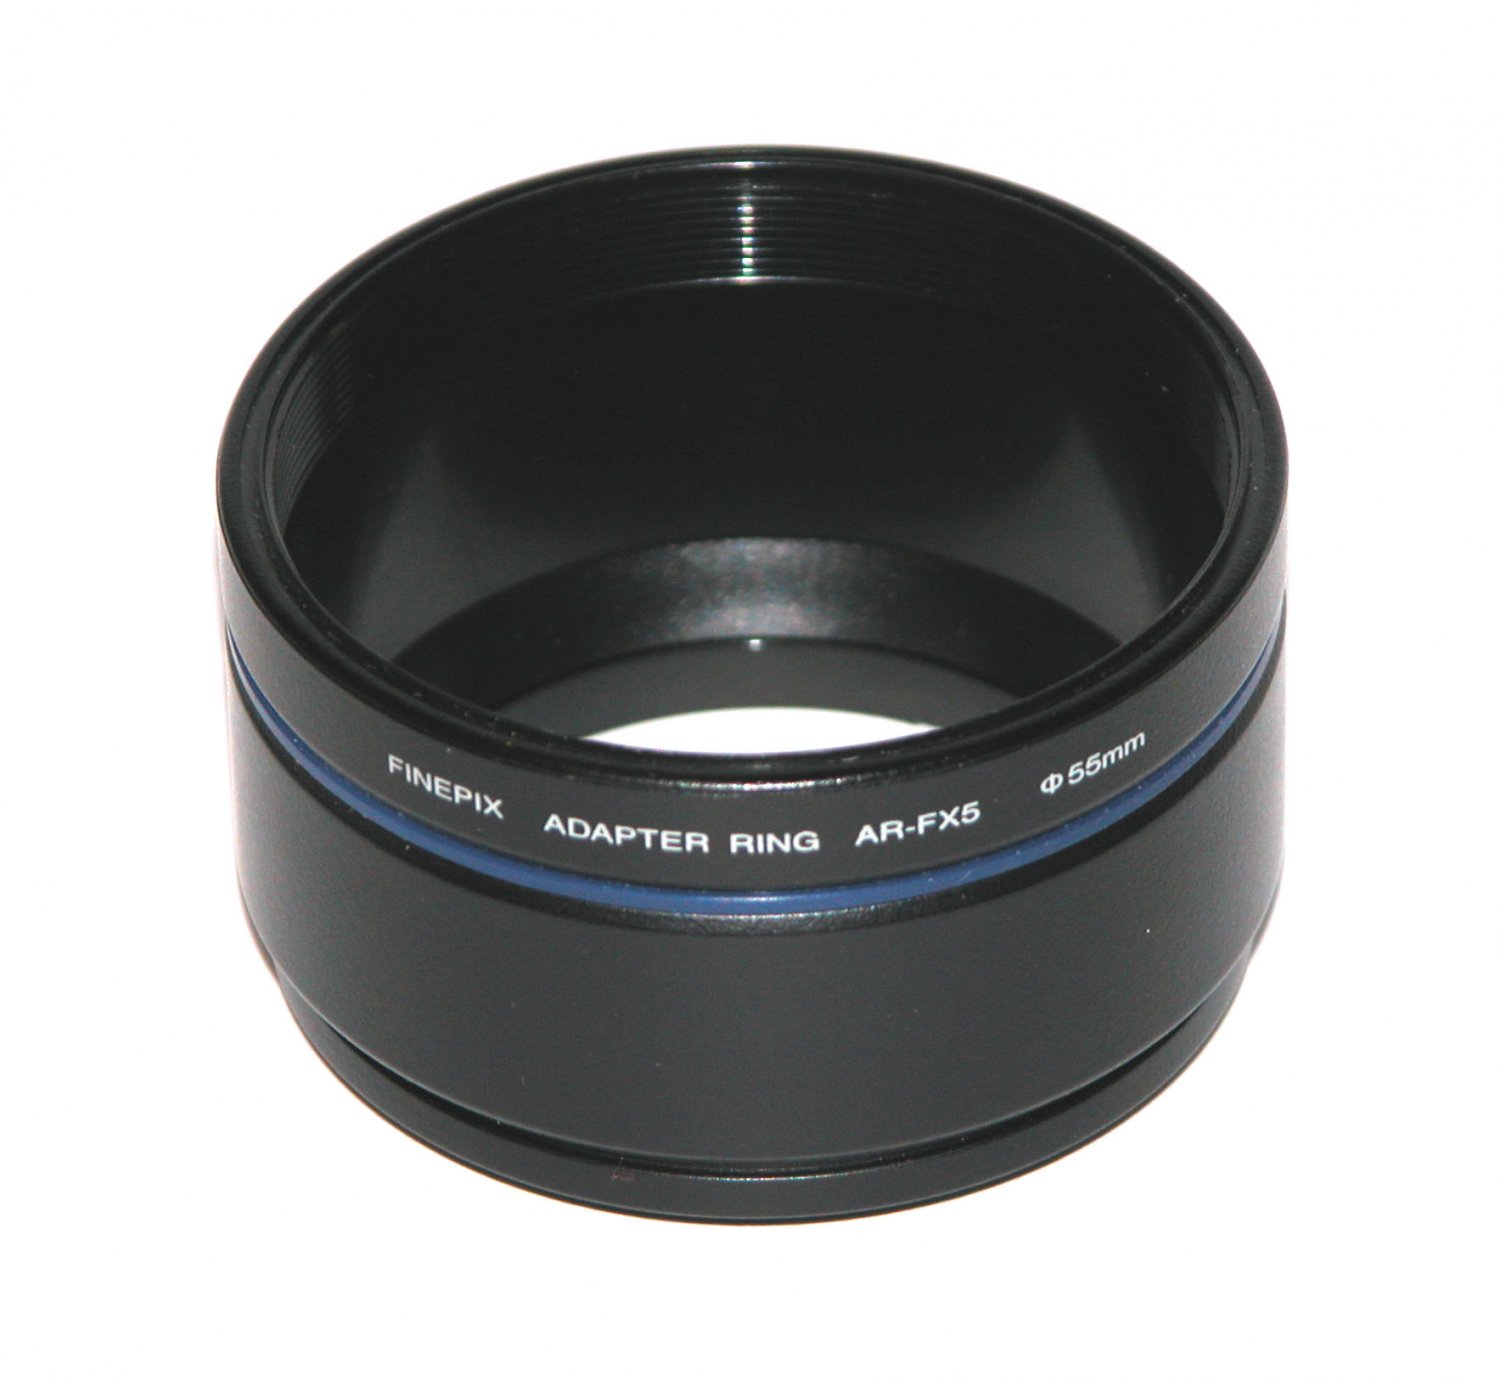 Lens Adapter Ring For Fujifilm Finepix S5000 S5100 (AR-FX5)